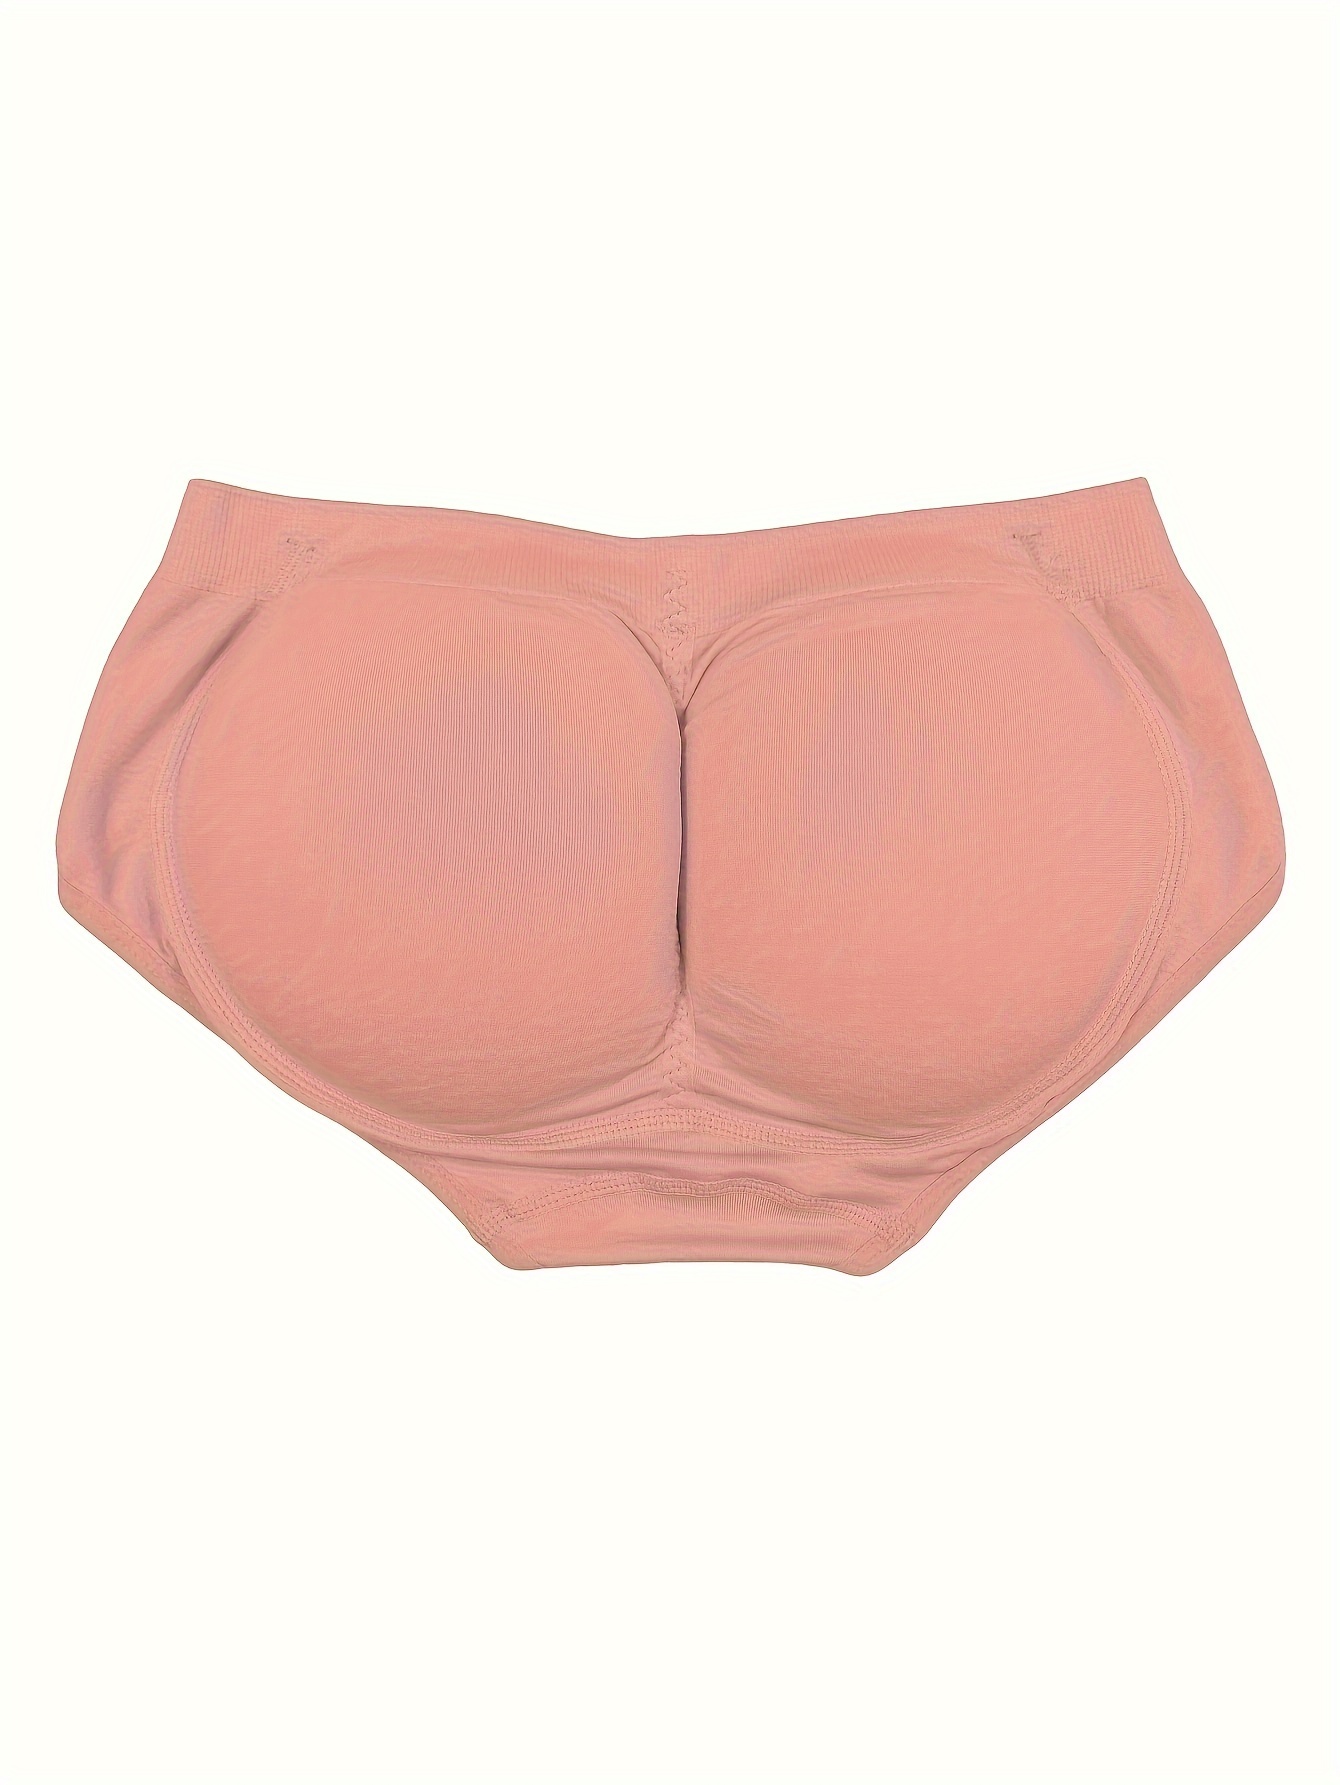 Padded Underwear, Body Curve Shaping Butt Lift Panties Breathable